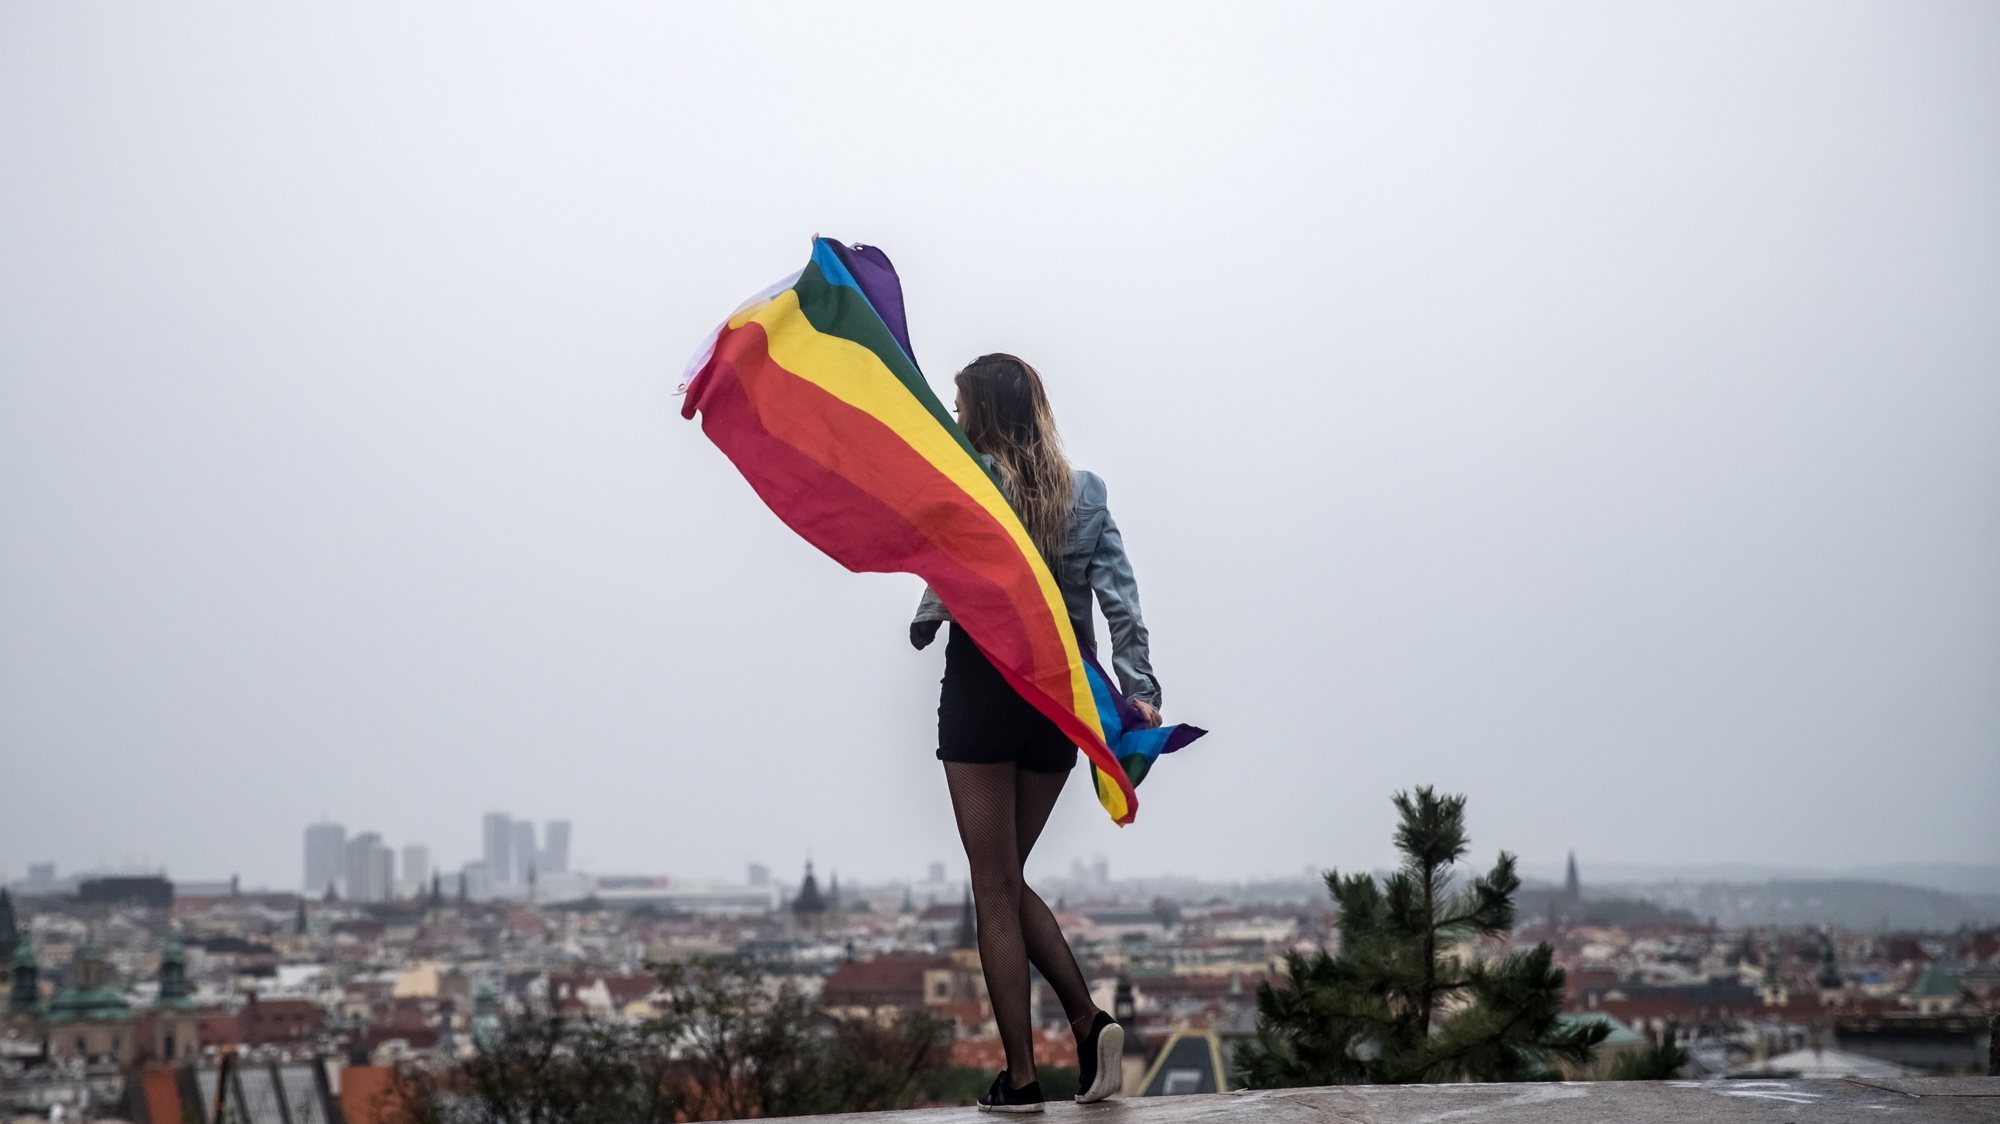 epa07766222 A woman wrapped in the rainbow flag pose for picture for her friend during the Prague Pride parade in downtown Prague, Czech Republic, 10 August 2019. Several thousands of people attended the 9th Prague Pride to support the LGBT (lesbian, gay, bisexual and transgender) communities.  EPA/MARTIN DIVISEK